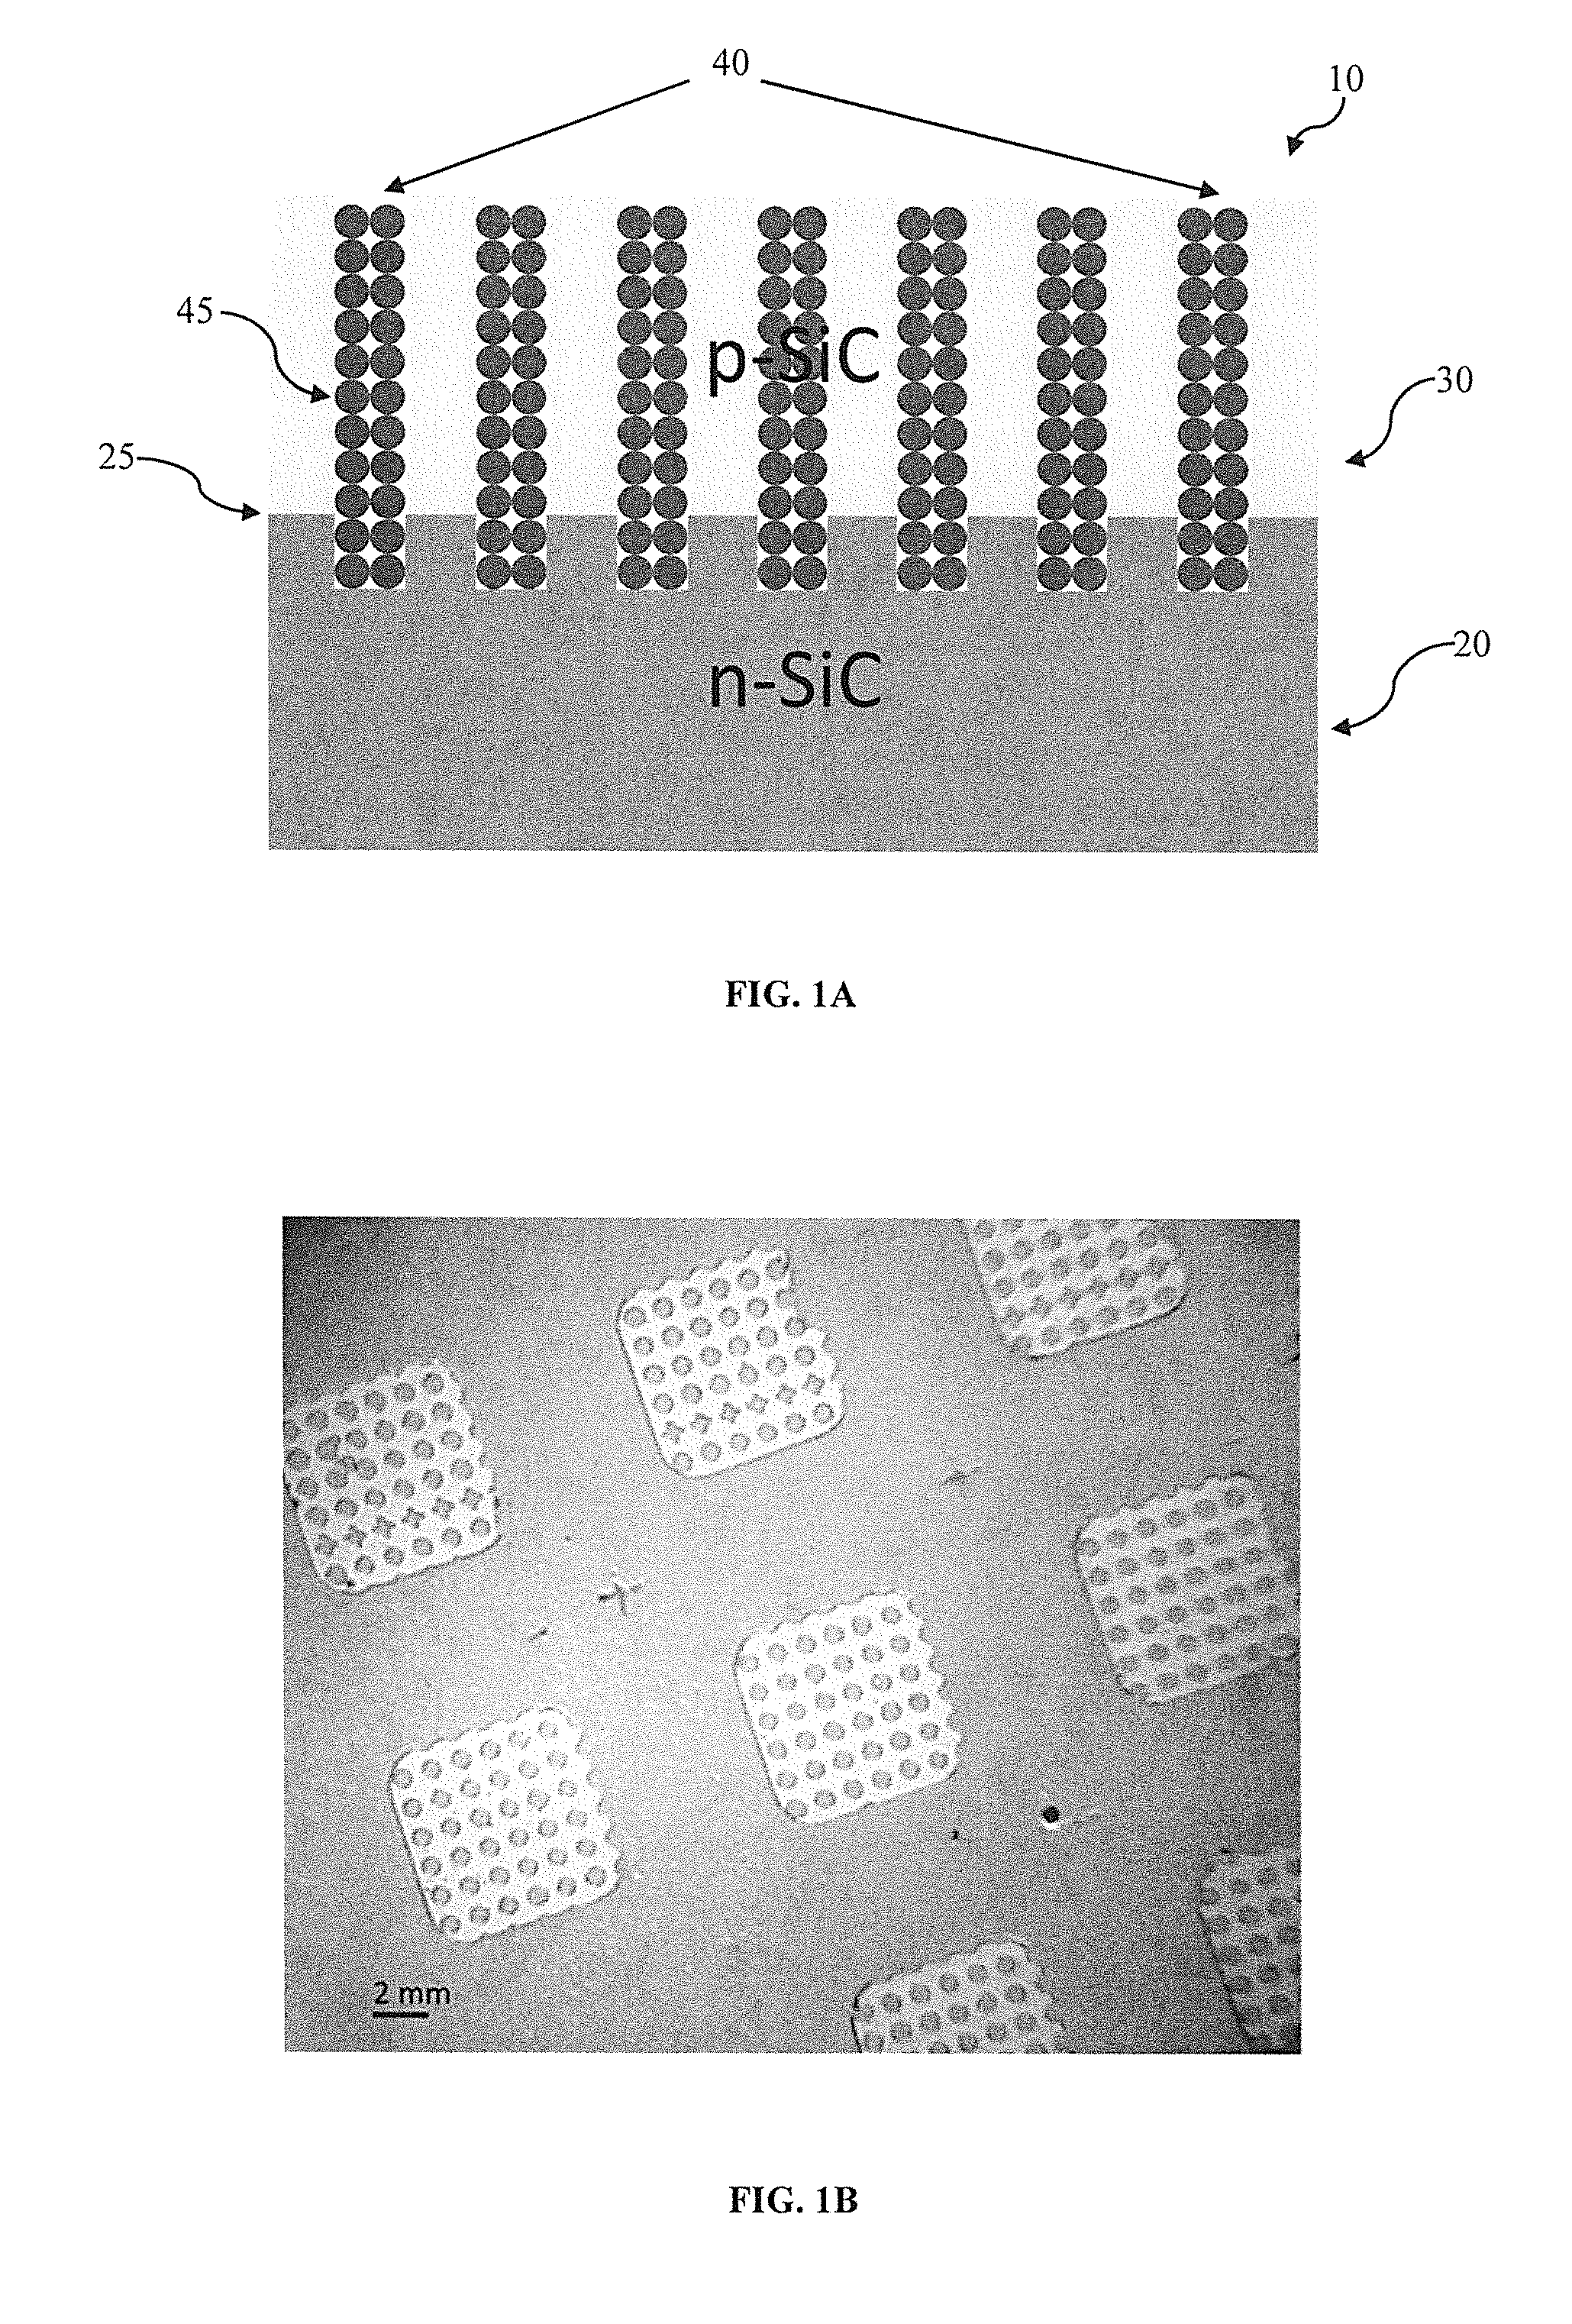 Light emitting diodes with quantum dot phosphors